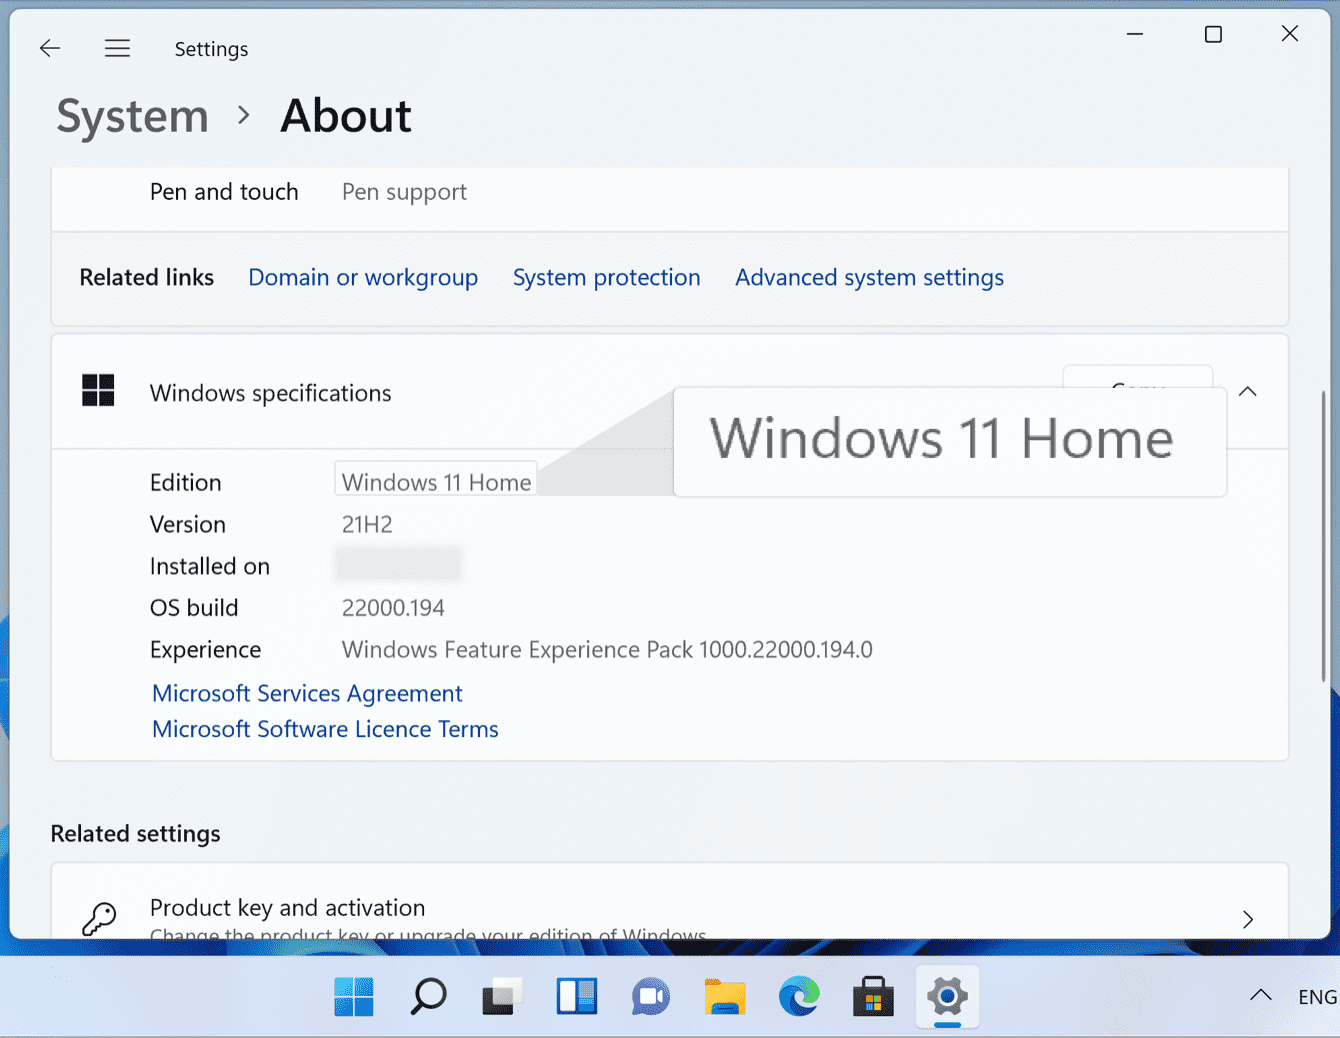 Under “Windows specifications,” next to “Edition,” you will see “Windows 11.”